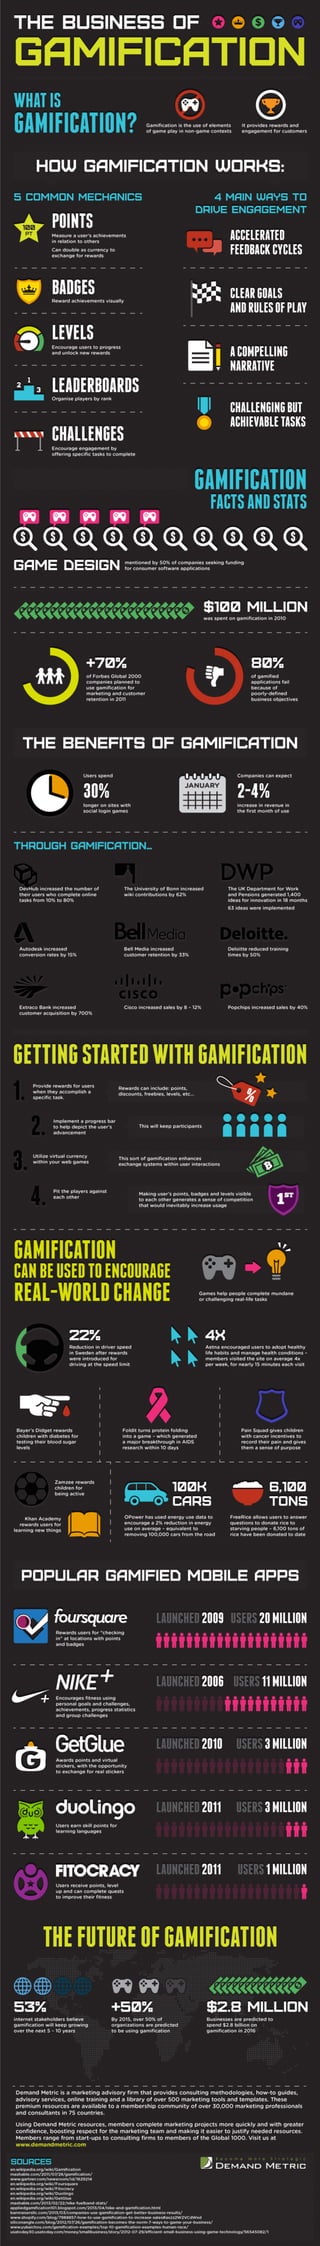 Gamification Infographic from Demand Metric